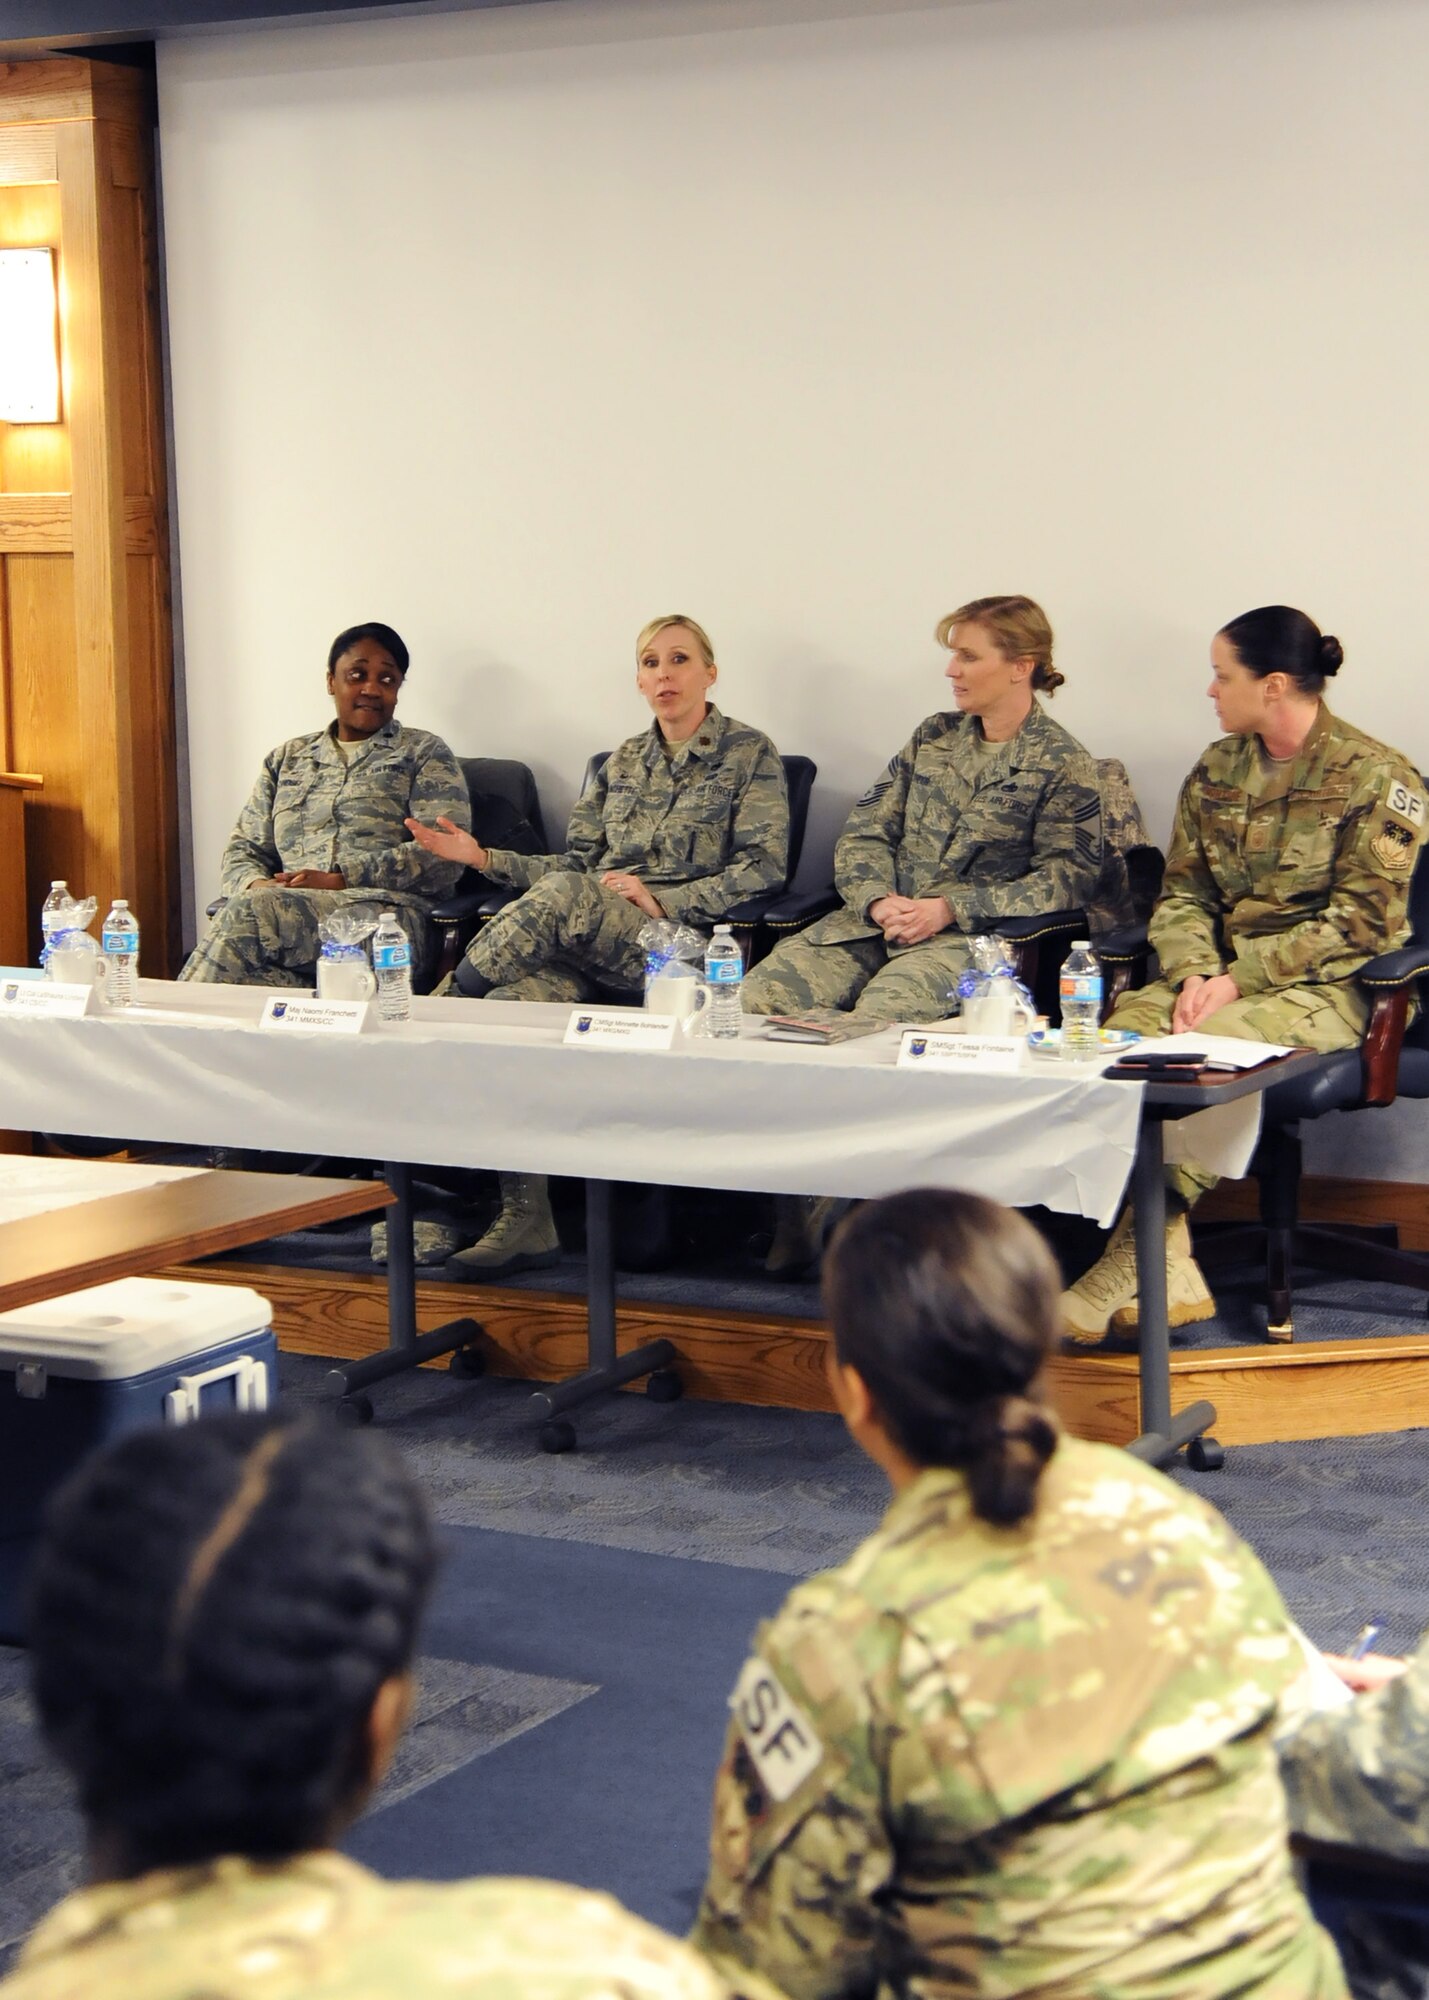 From left to right, Lt. Col. LaShauna Lindsey, 341st Communications Squadron commander; Maj. Naomi Franchetti, 341st Missile Maintenance Squadron commander; Chief Master Sgt. Minnette Bohlander, 341st Maintenance Group superintendent; and Senior Master Sgt. Tessa Fontaine, 341st Security Support Squadron security forces manager, discuss a topic during the first “Let’s Connect” event Nov. 16, 2017, at Malmstrom Air Force Base, Mont. “Let’s Connect” is a professional development directed primarily toward females but is open to anyone to help individuals understand their peers, leaders and subordinates better. (U.S. Air Force photo by Christy Mason)